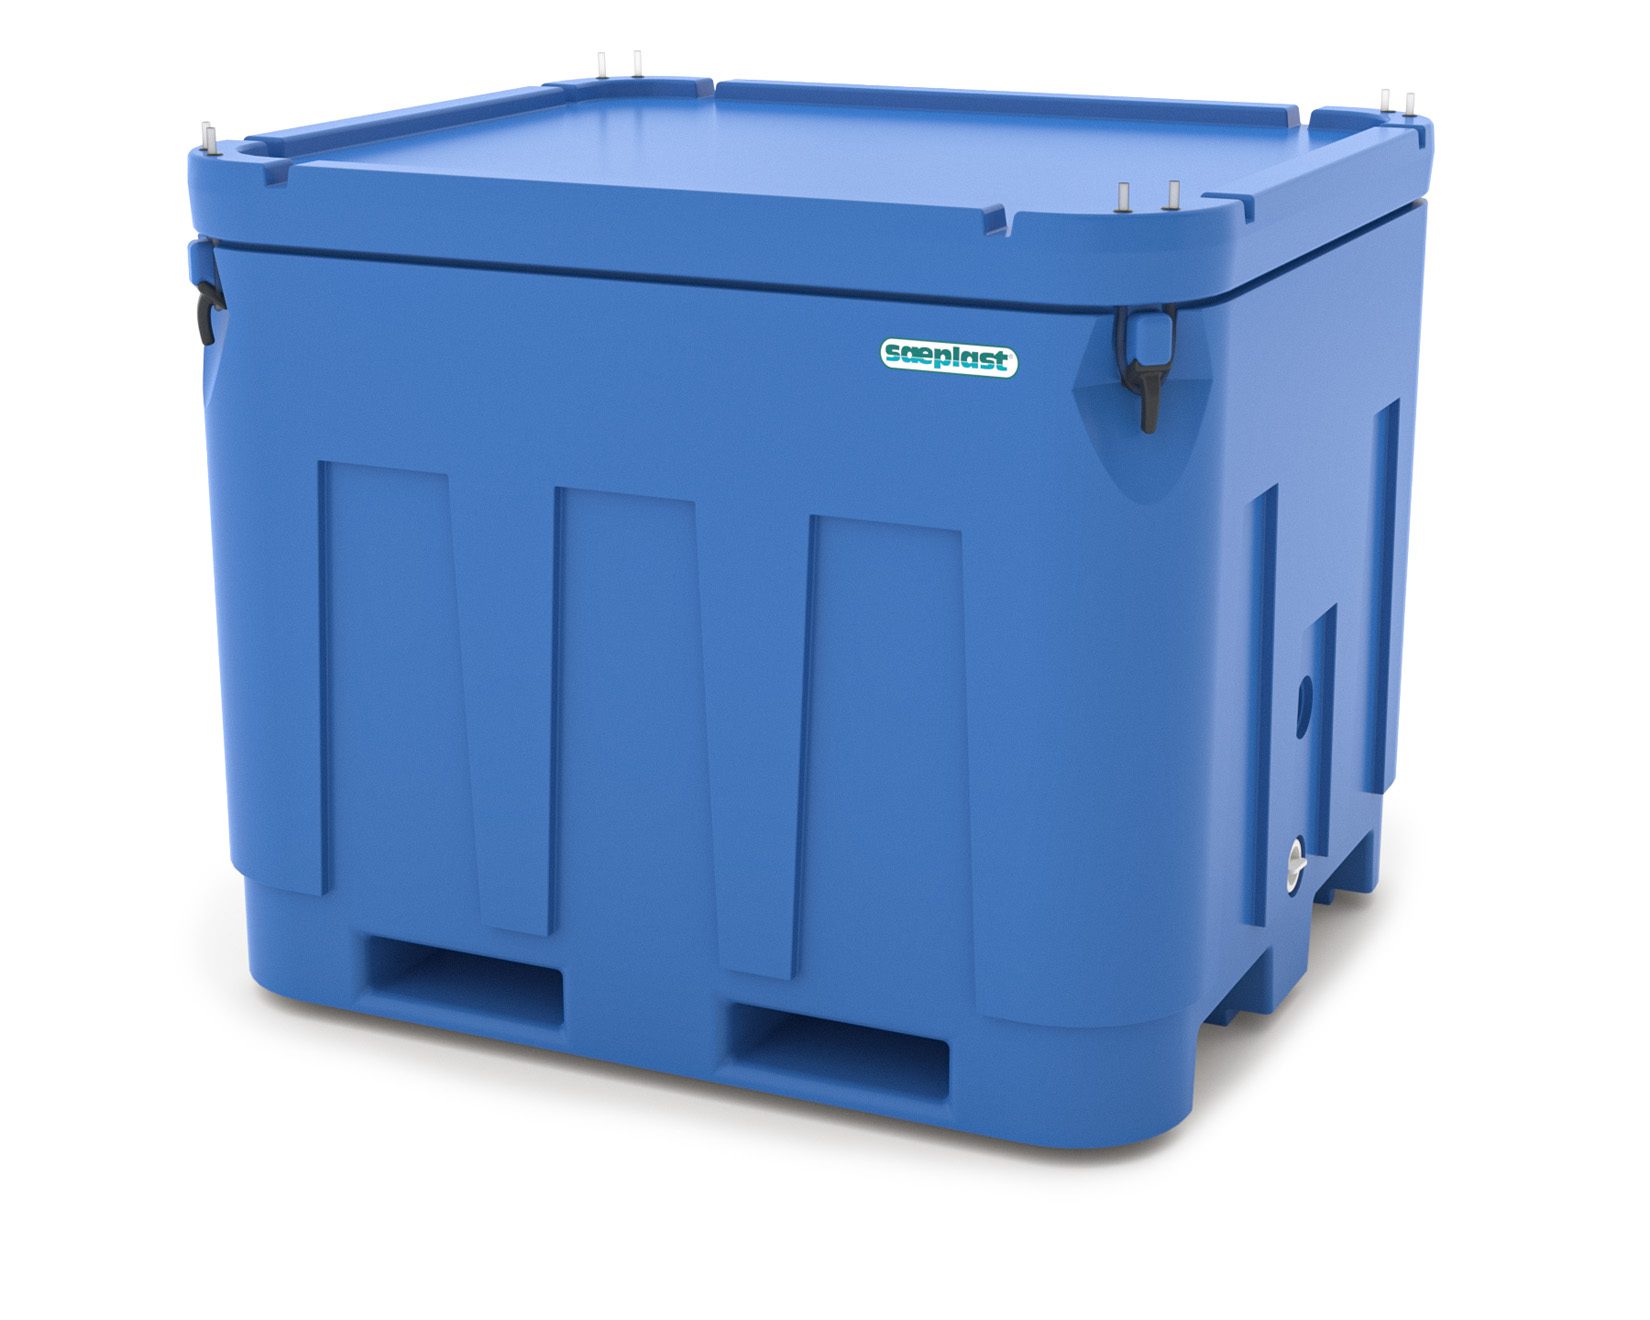 The Saeplast D332 fish, meat and poultry container